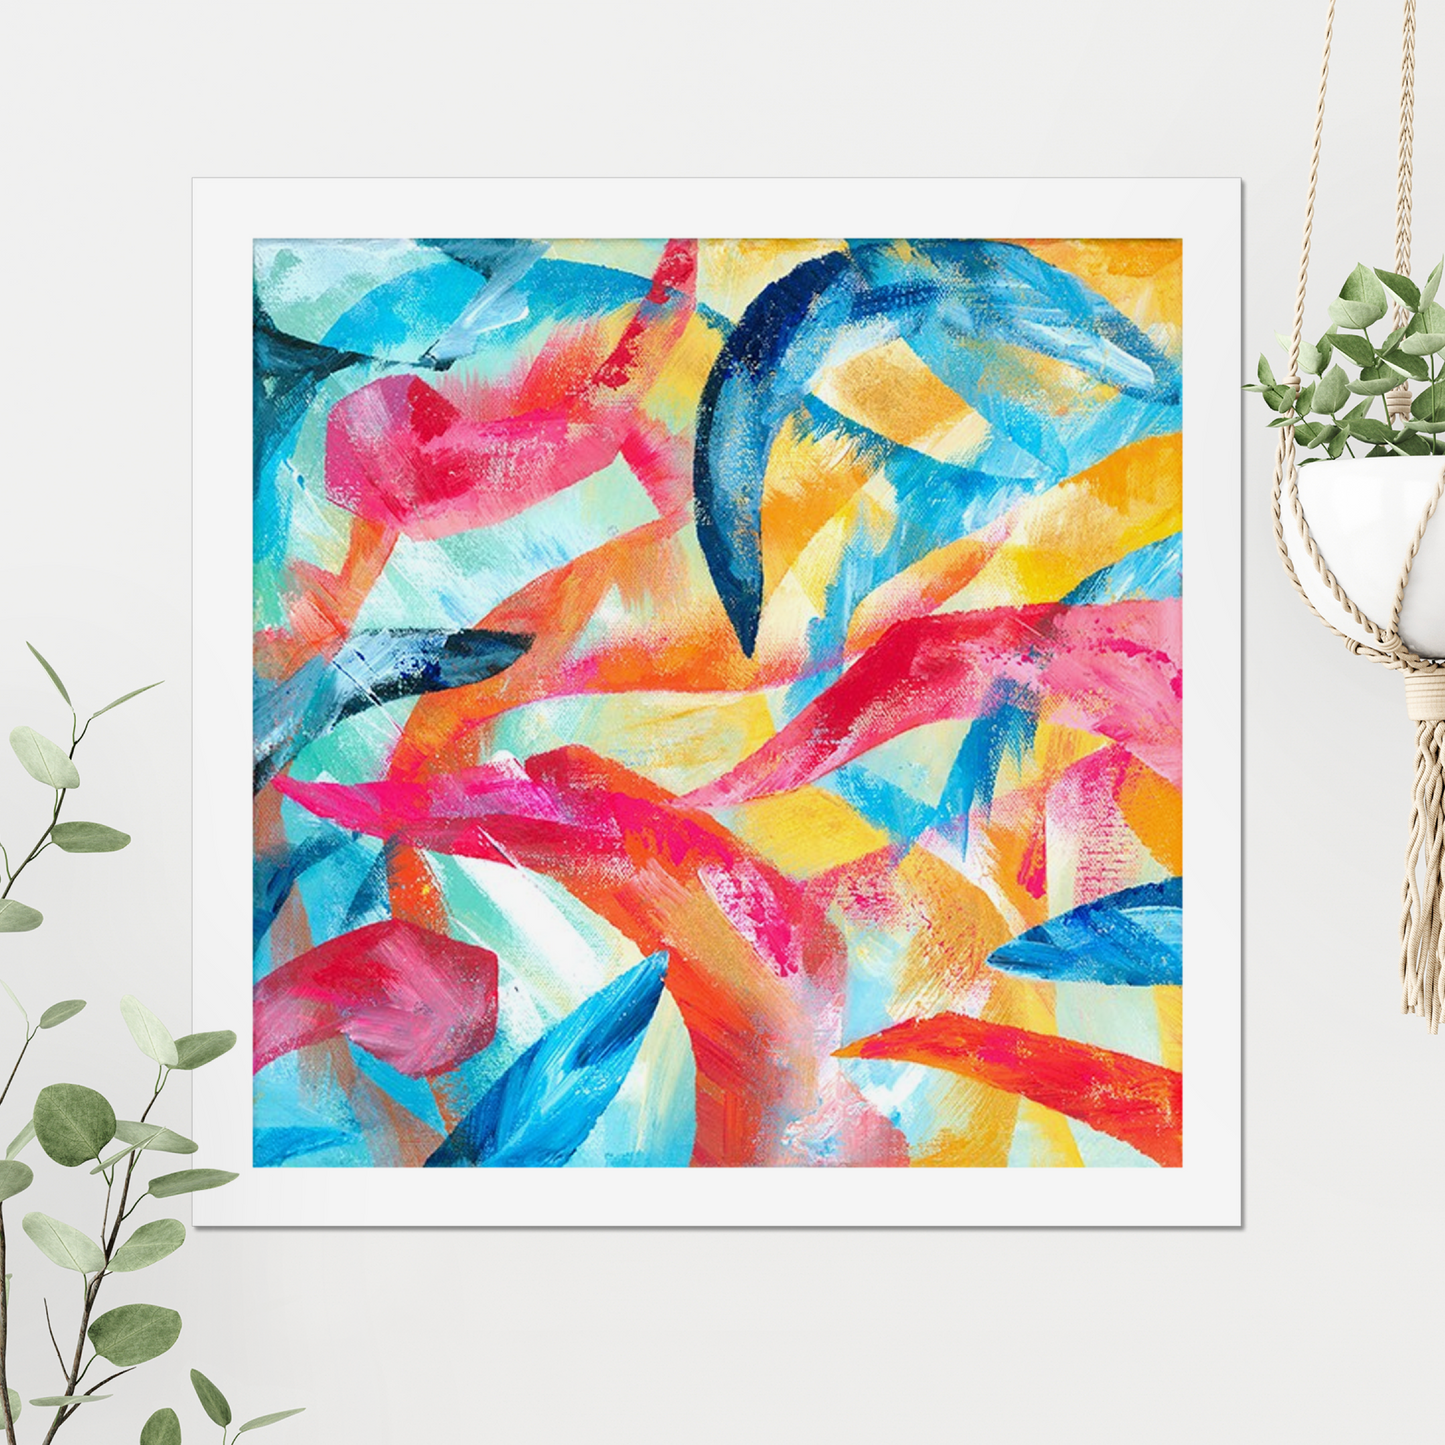 Adventure colourful abstract art print shown with a white border around it.